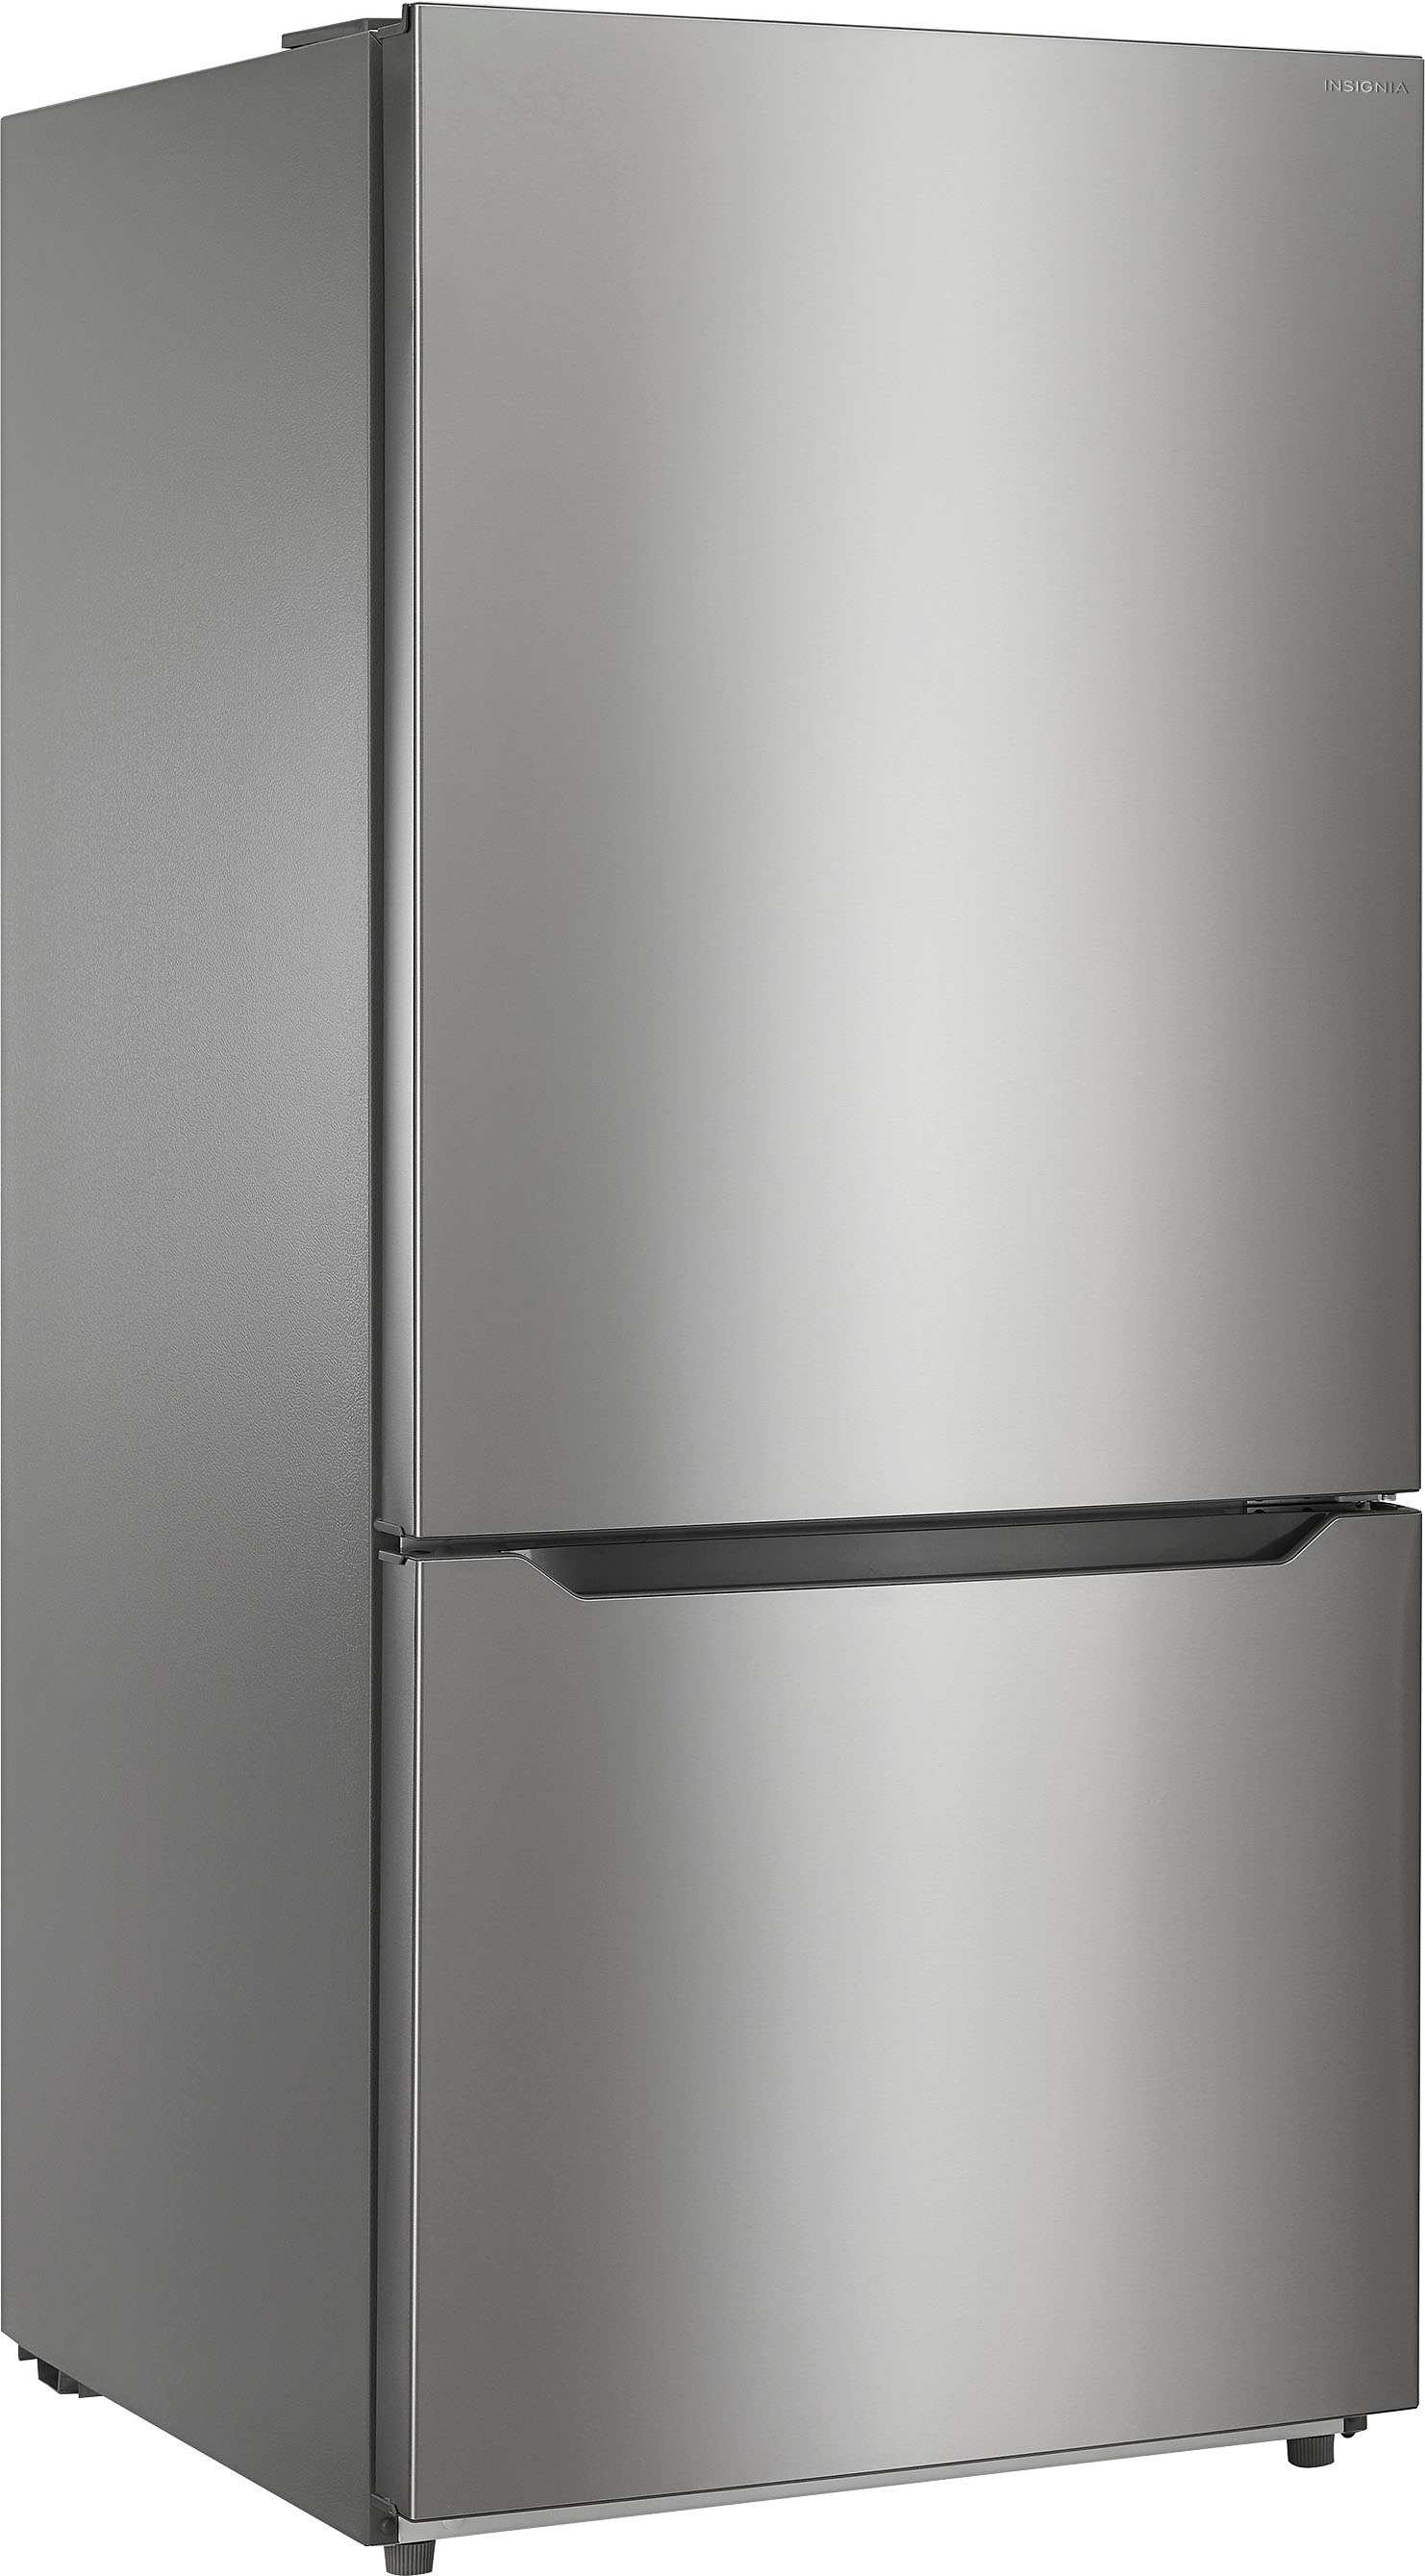 Angle View: KitchenAid - 20 Cu. Ft. French Door Counter-Depth Refrigerator - Black Stainless Steel